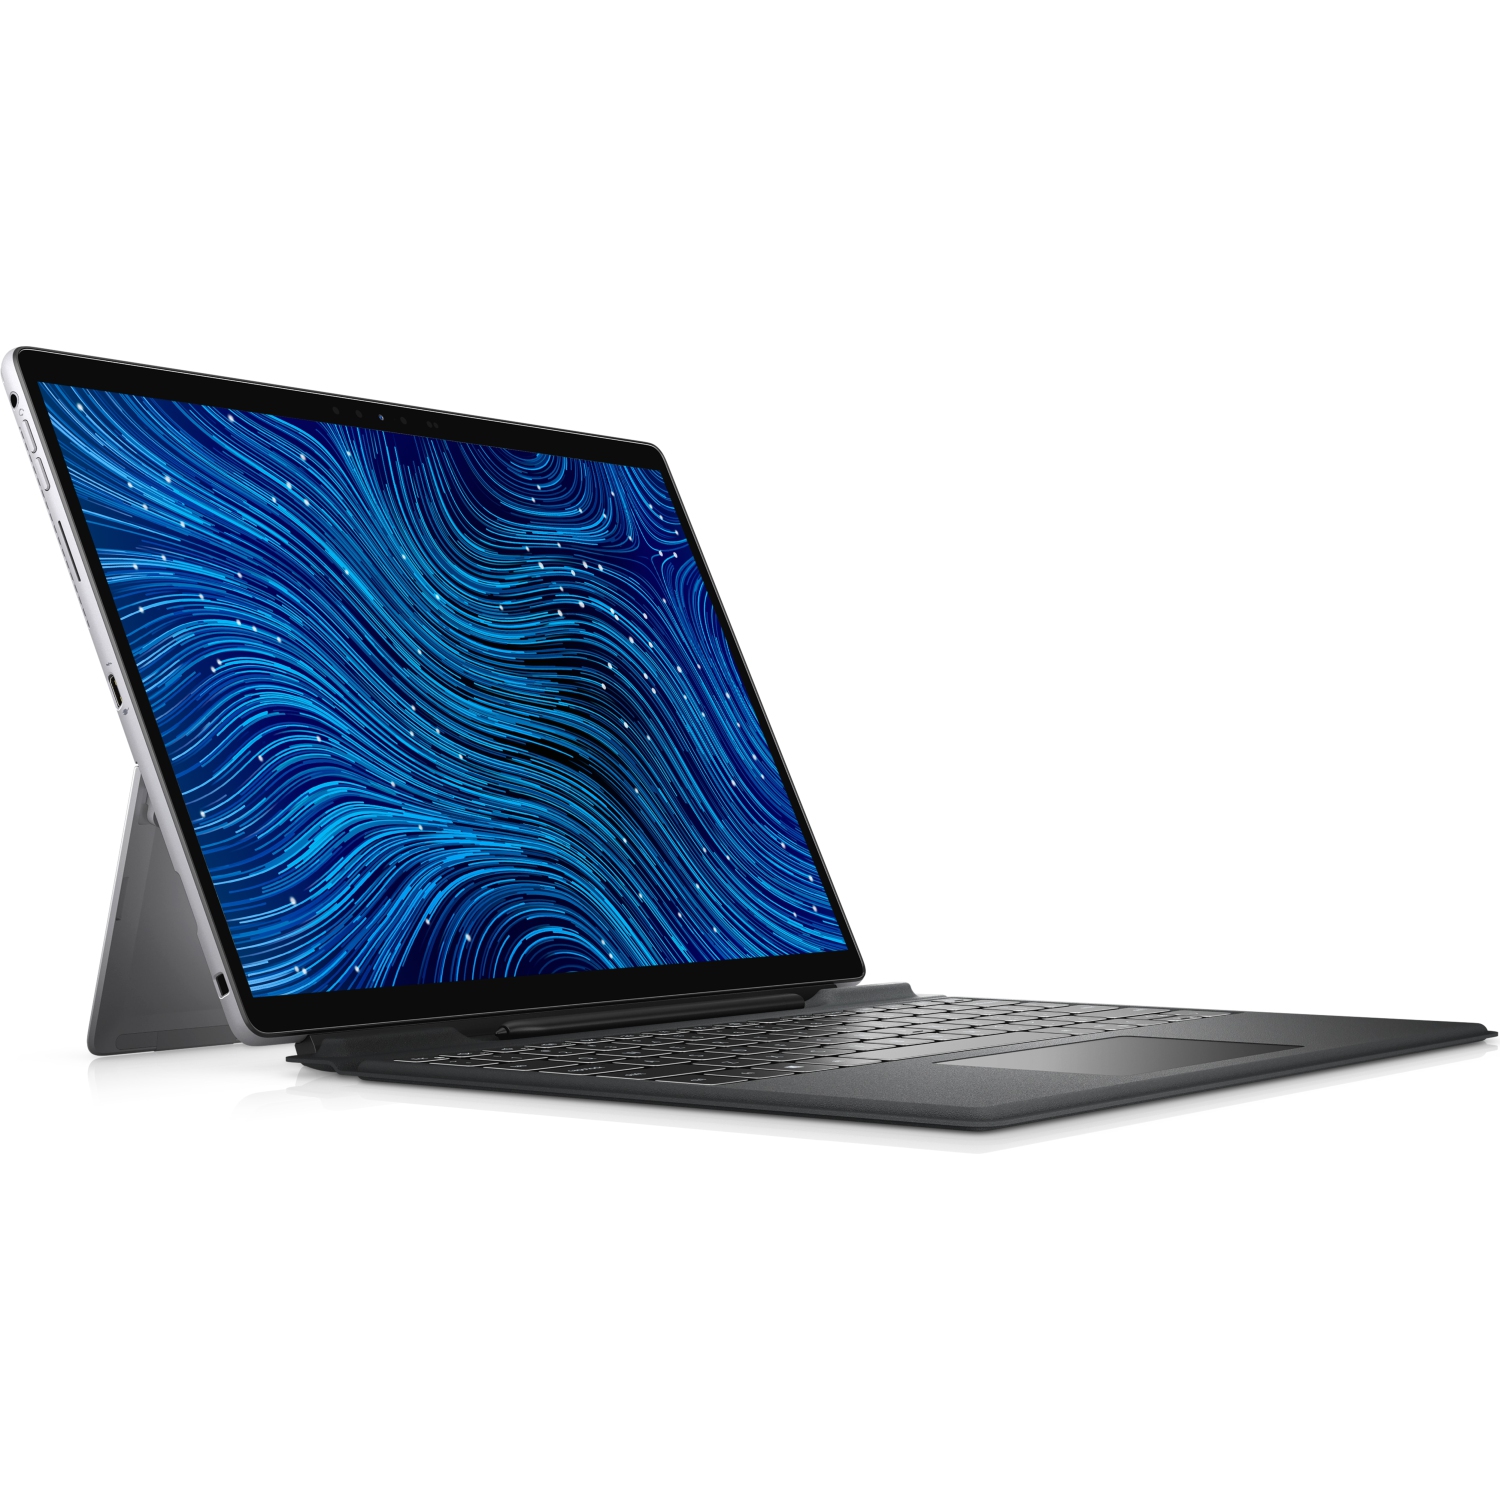 Refurbished (Excellent) Dell Latitude 7320 Detachable Detachable 2-in-1 Laptop | 13" 1920x1280 FHD+ | Core i5-1140G7 - 256GB SSD Hard Drive - 16GB RAM | 4 cores @ 4.2 GHz Win 11